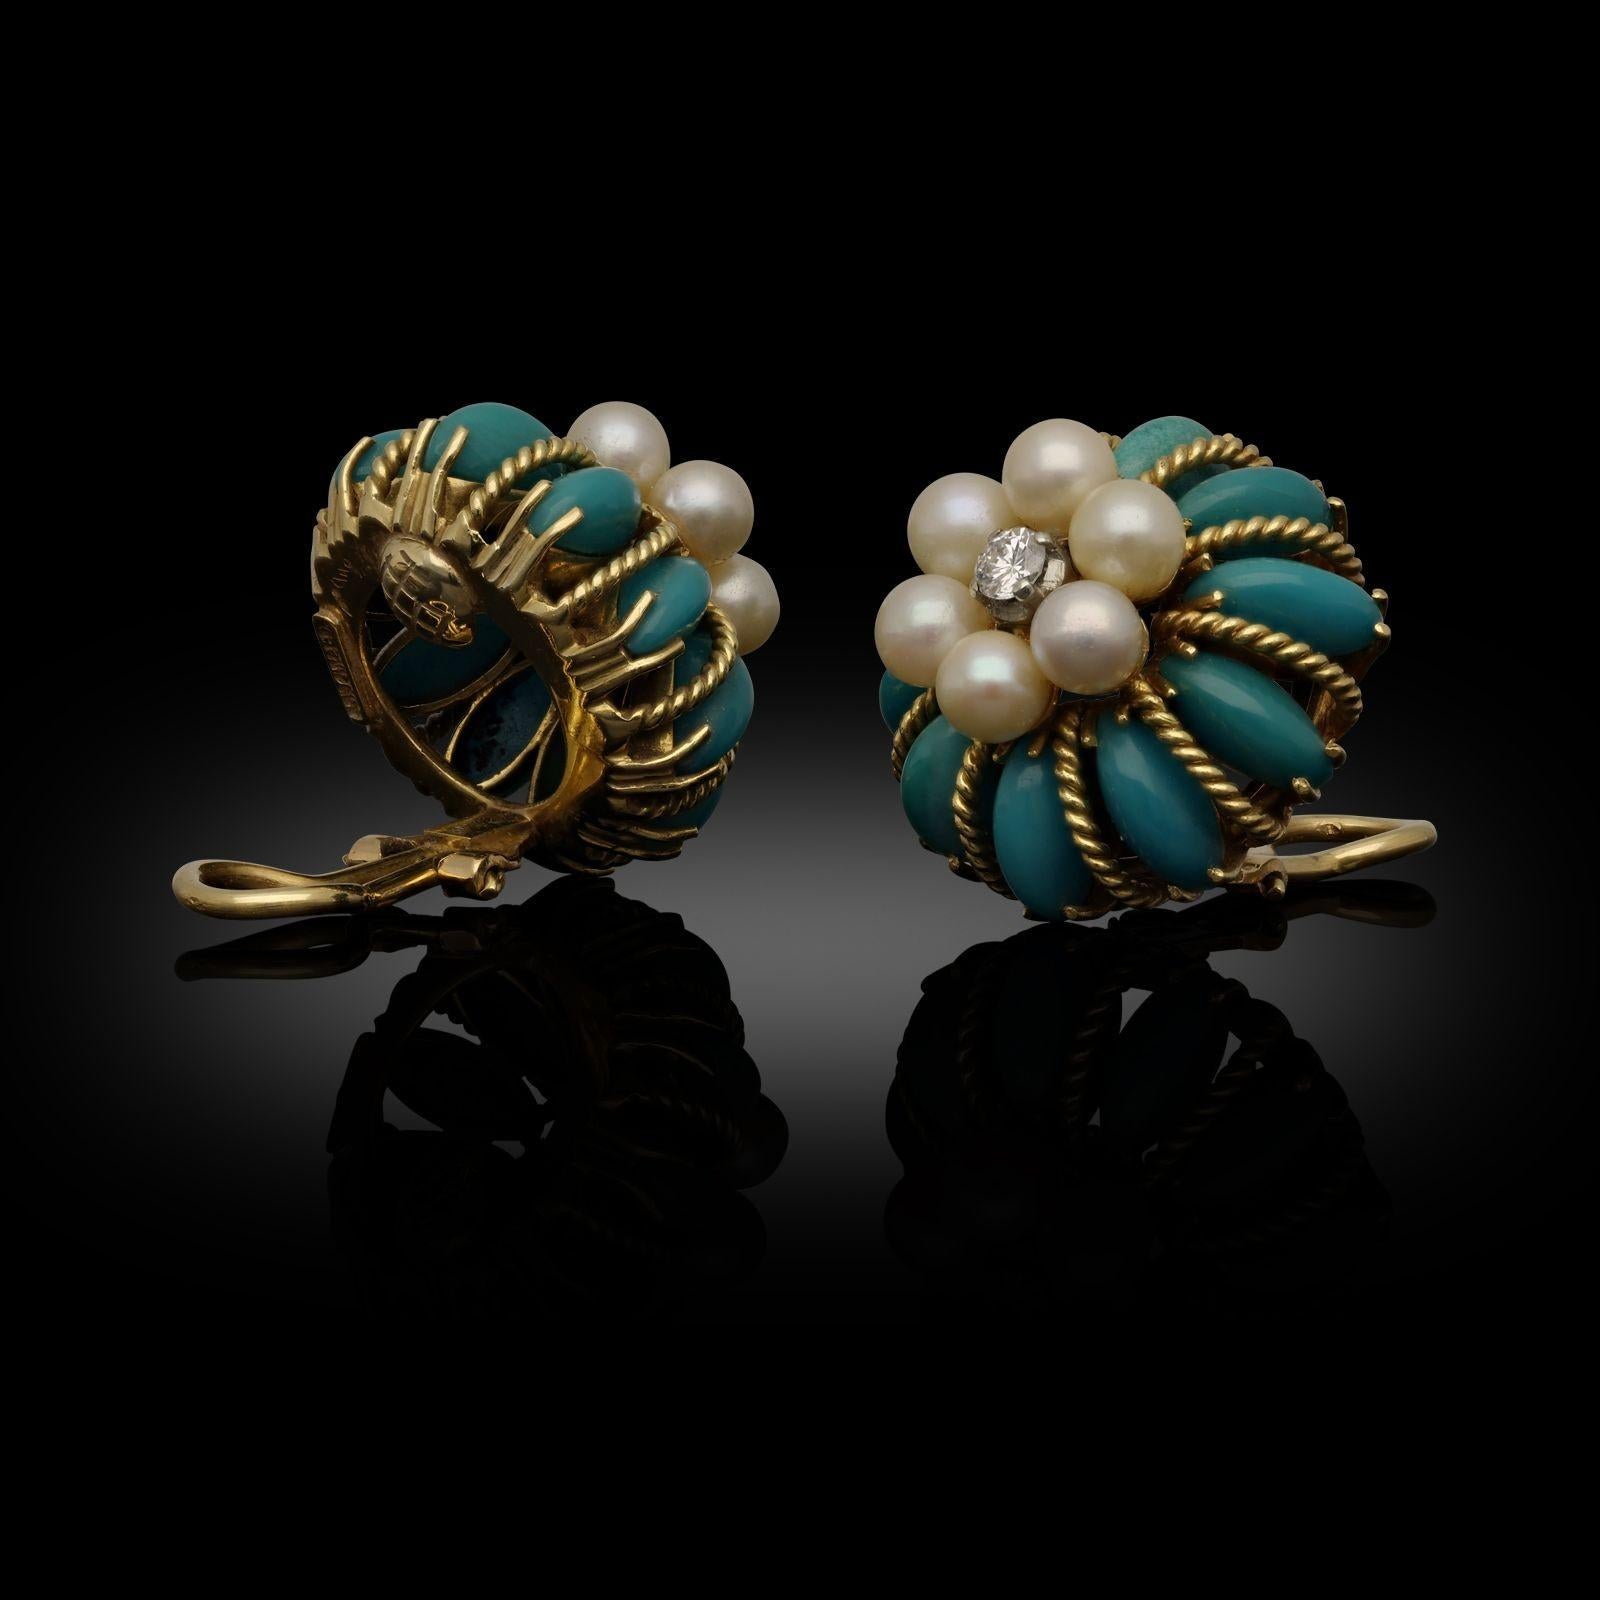 A striking pair of vintage 18ct gold, turquoise and pearl ear clips by Tiffany & Co. circa 1960s, the earrings of circular domed design centred with a round brilliant cut diamond and round cream pearl cluster surrounded by a series of uniform